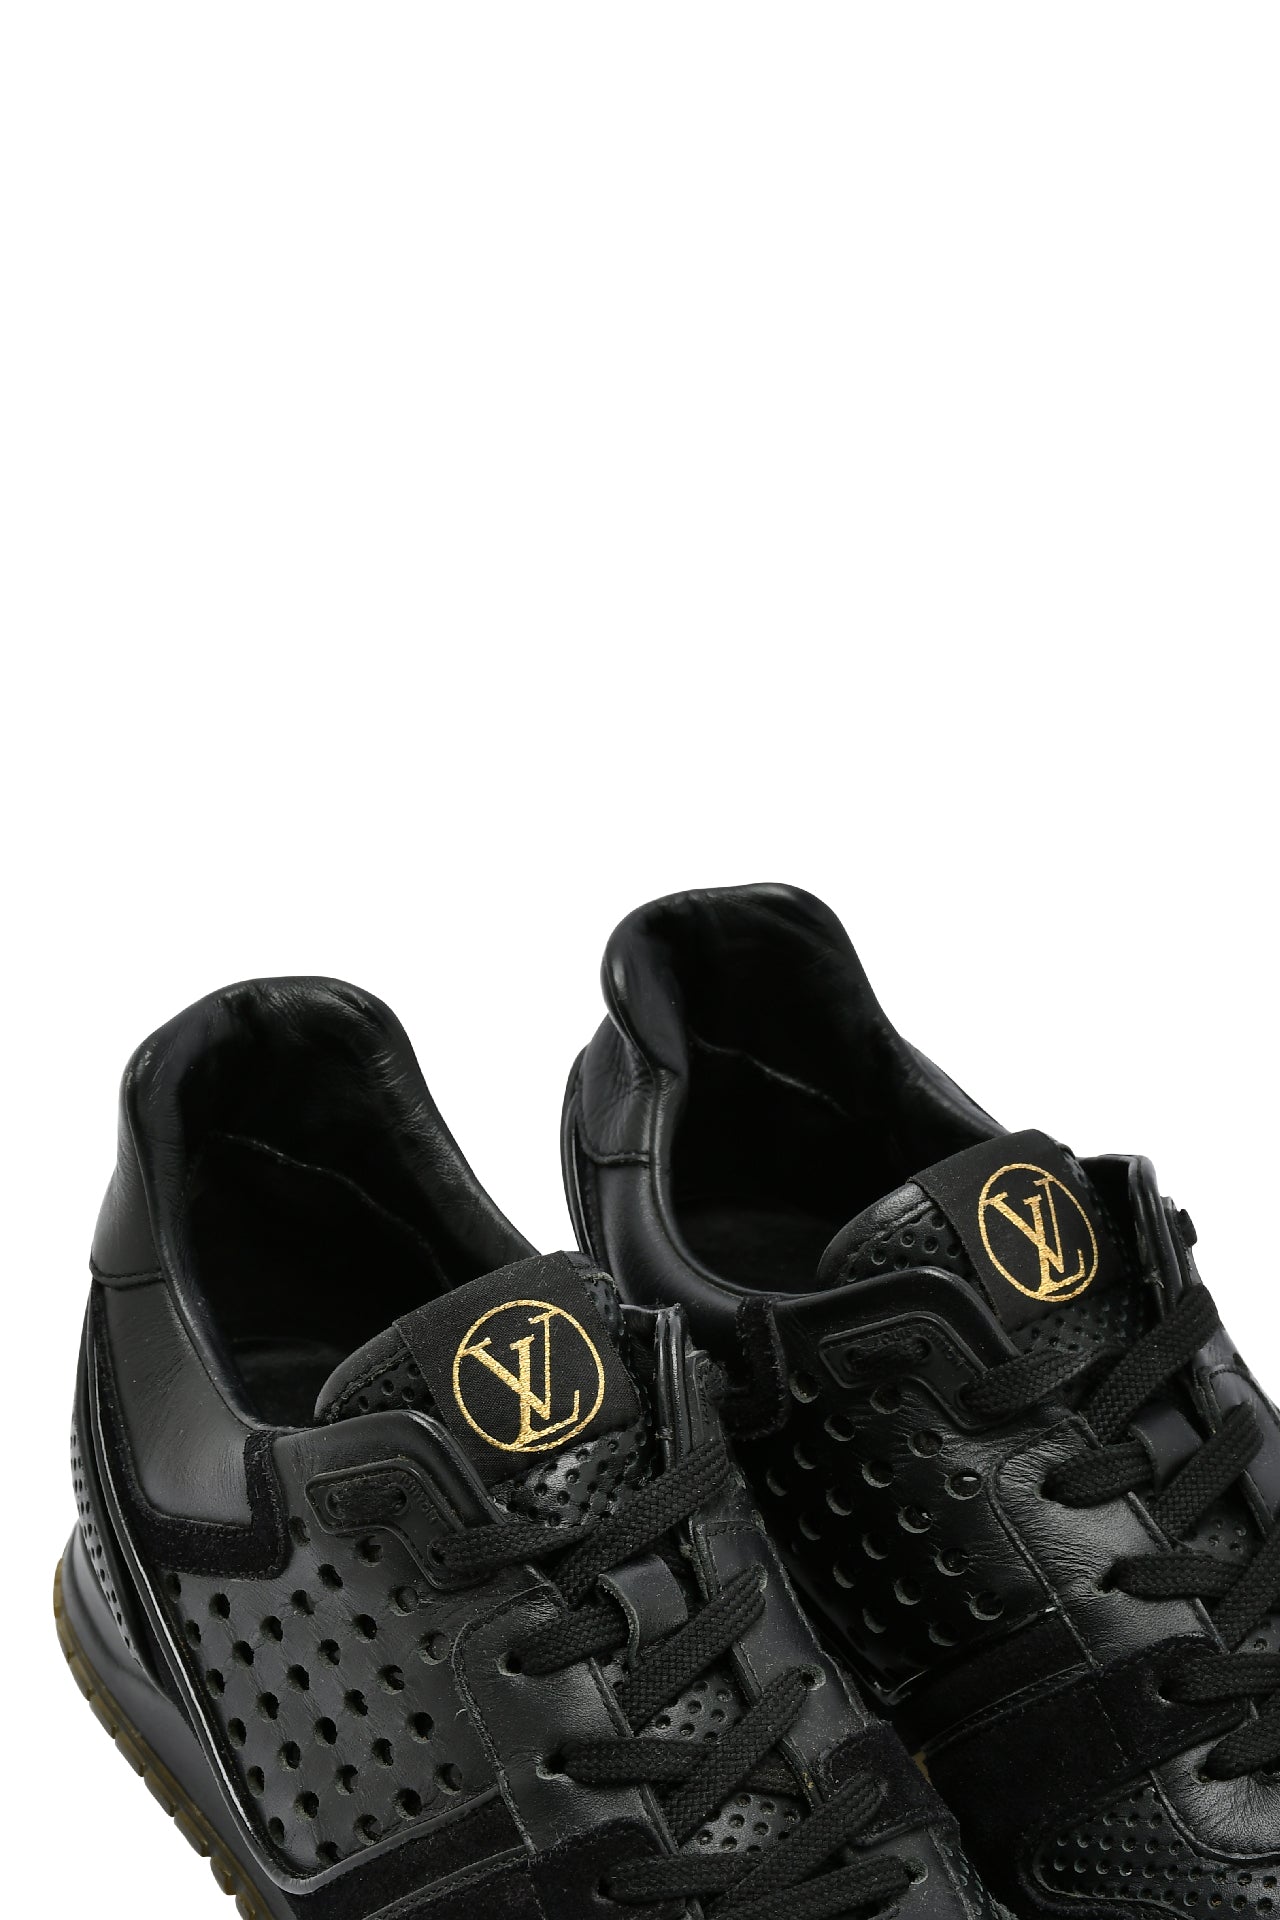 Louis Vuitton Black Perforated Leather and Suede Run Away Sneakers EU 39